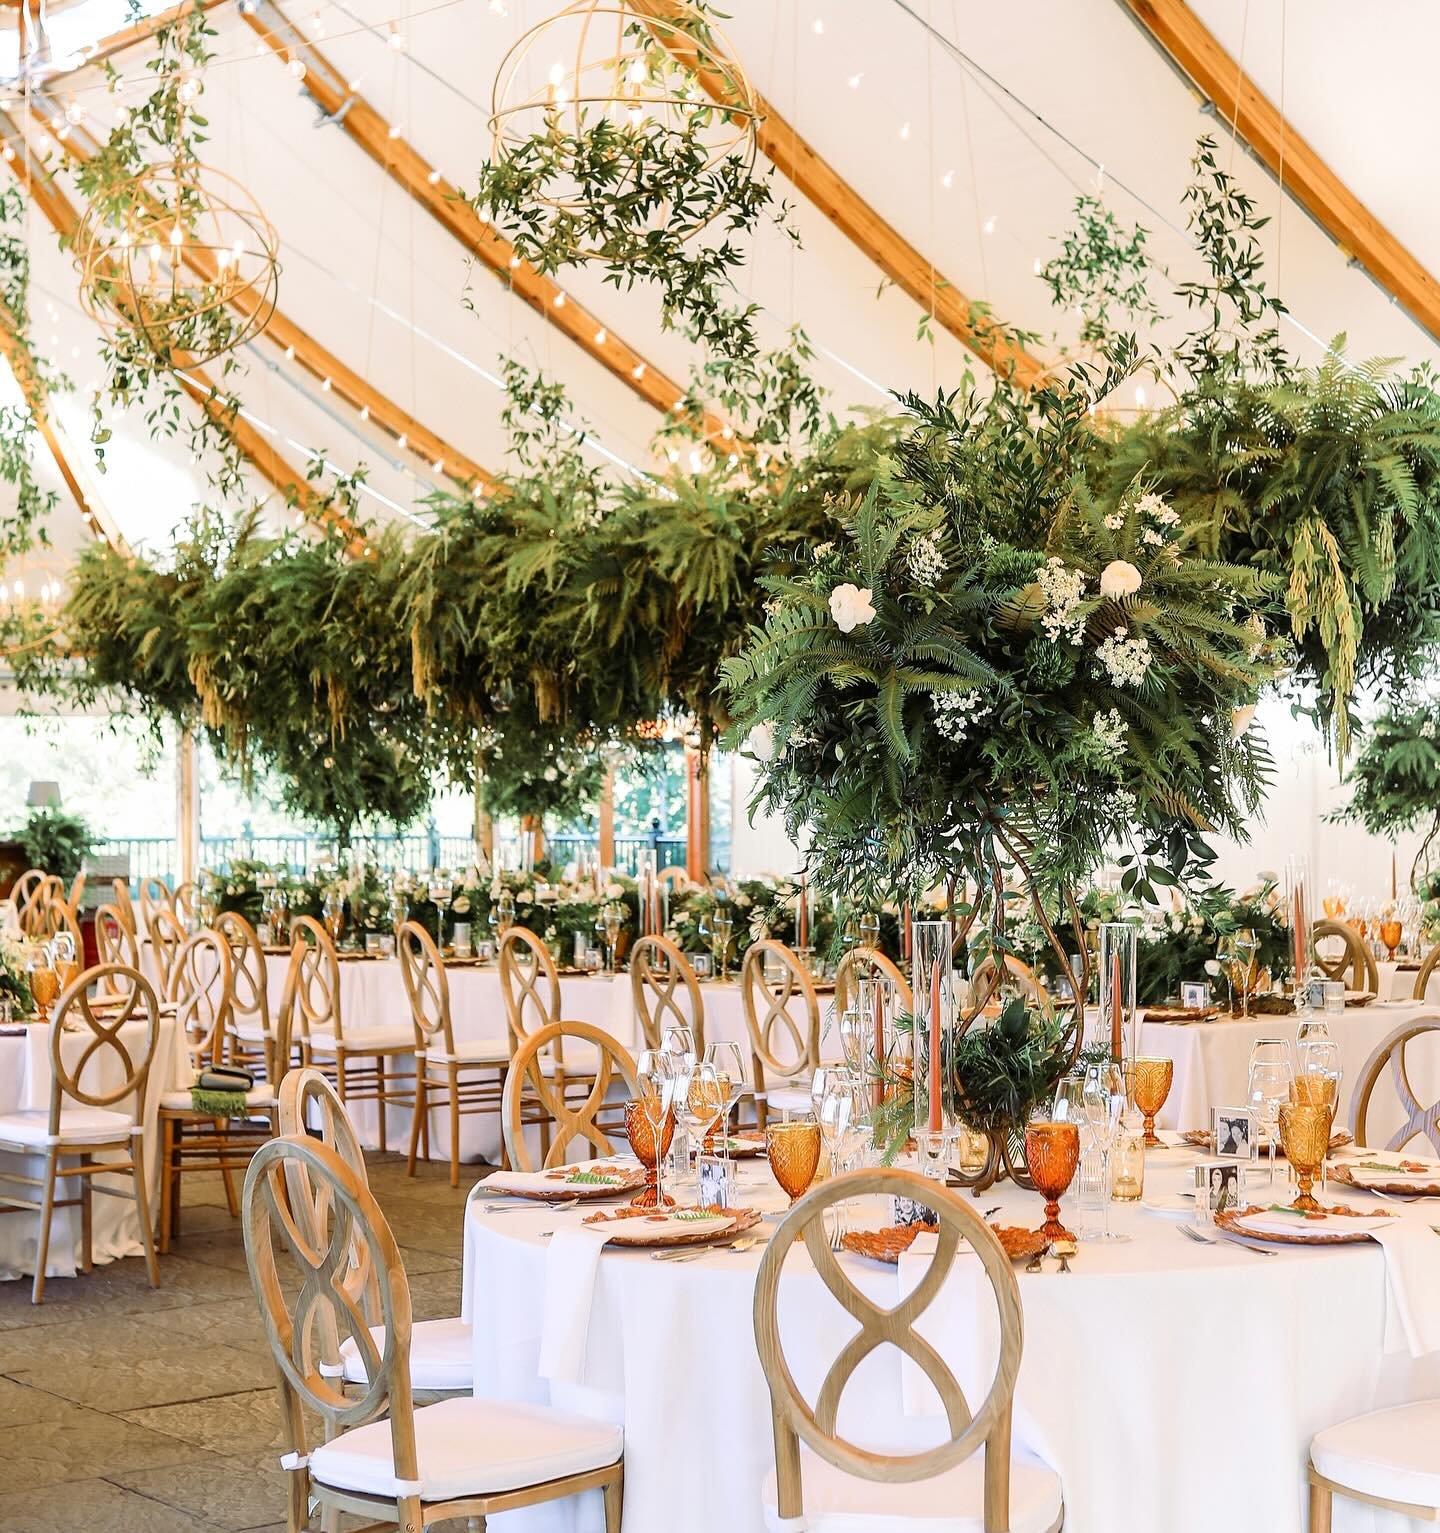 Castle Hill transformed into a garden oasis🌿Chandeliers dripped in delicate vines and ferns created an enchanting canopy over the head table while the soft glow of candlelight played off the foliage. Guests were surrounded by the ethereal beauty of 